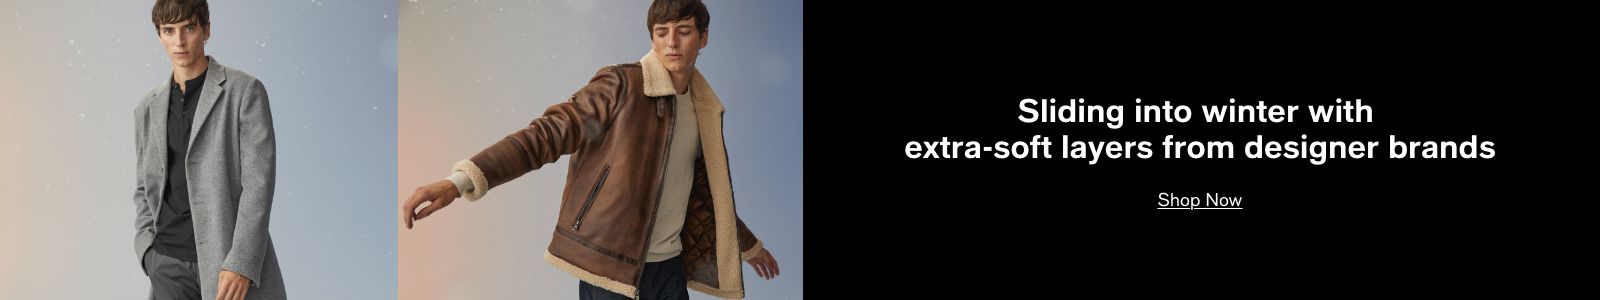 Sliding into winter with extra-soft layers from designer brands